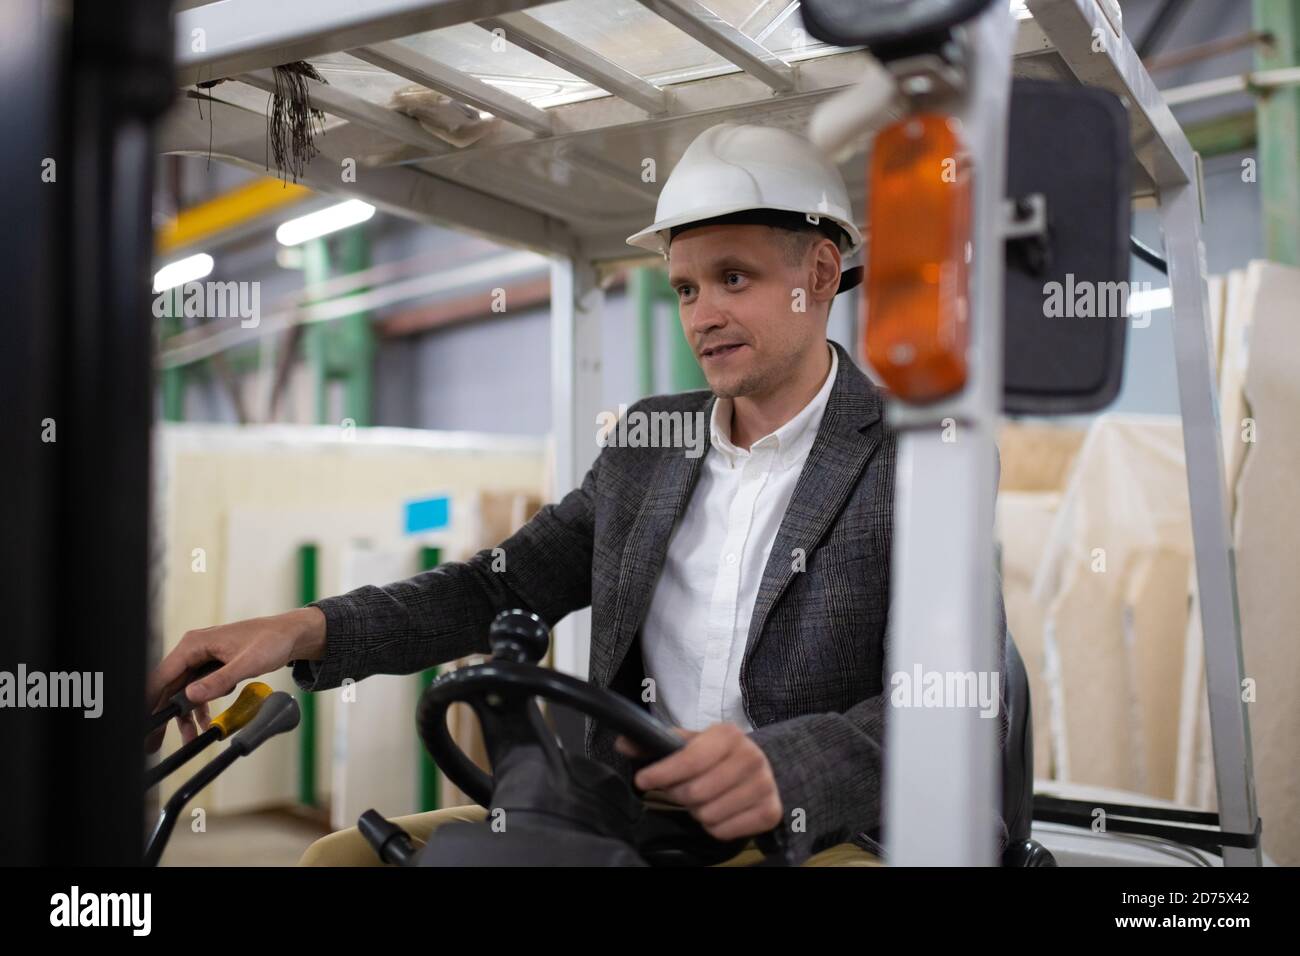 Elegant male employee in jacket and hardhat operating forklift while working in modern warehouse Stock Photo